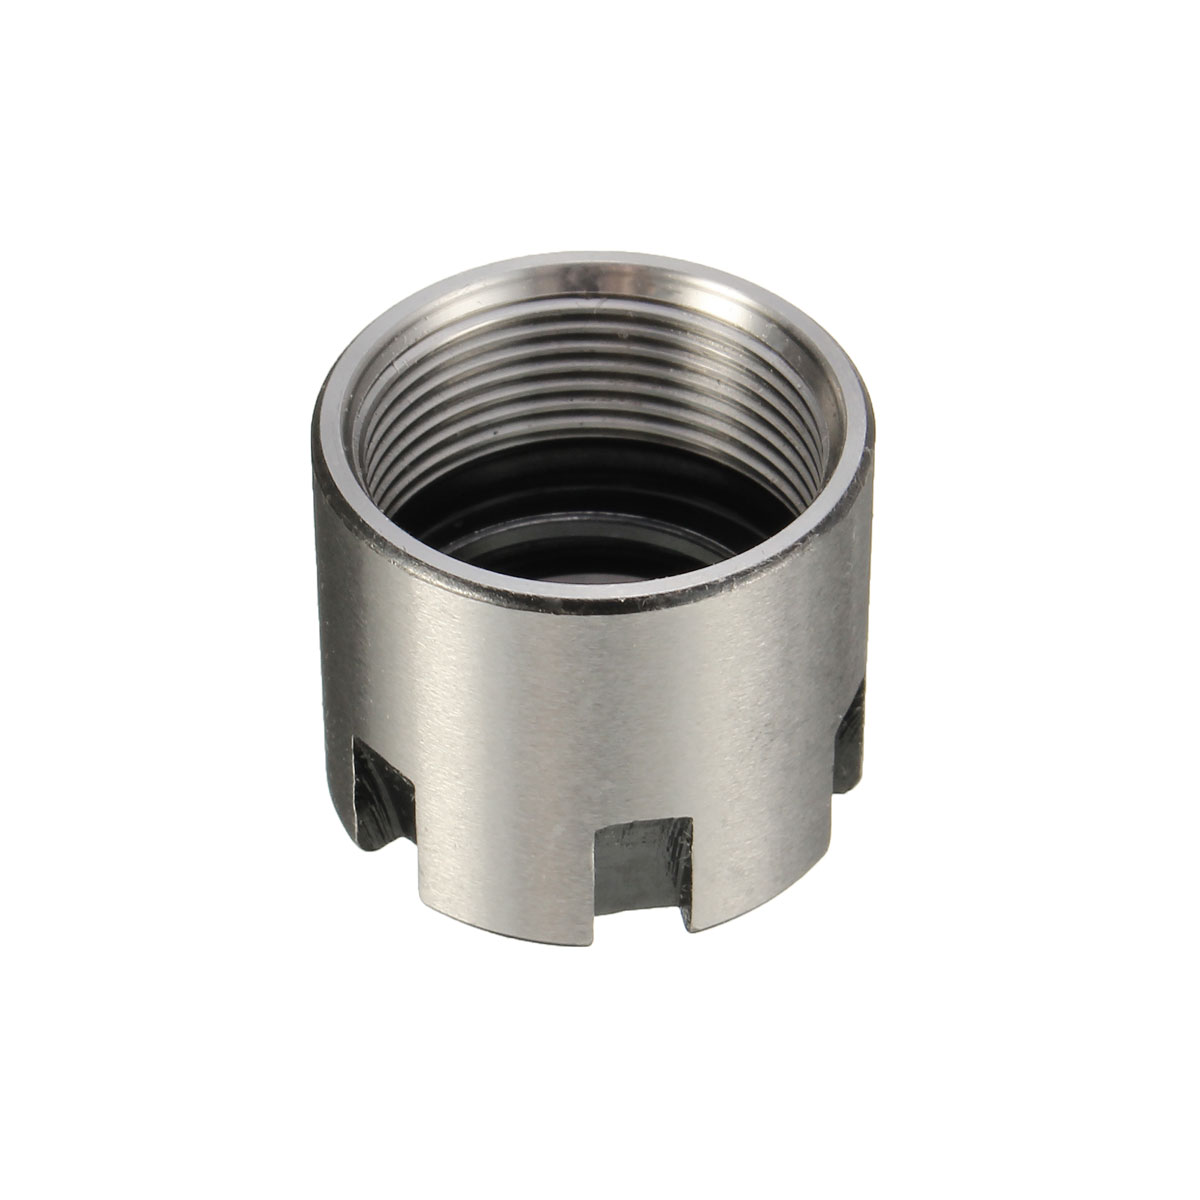 ER--A-M-Type-Nut-Collet-Clamping-Nut-for-CNC-Milling-Chuck-Holder-Lathe-Tool-1064956-8